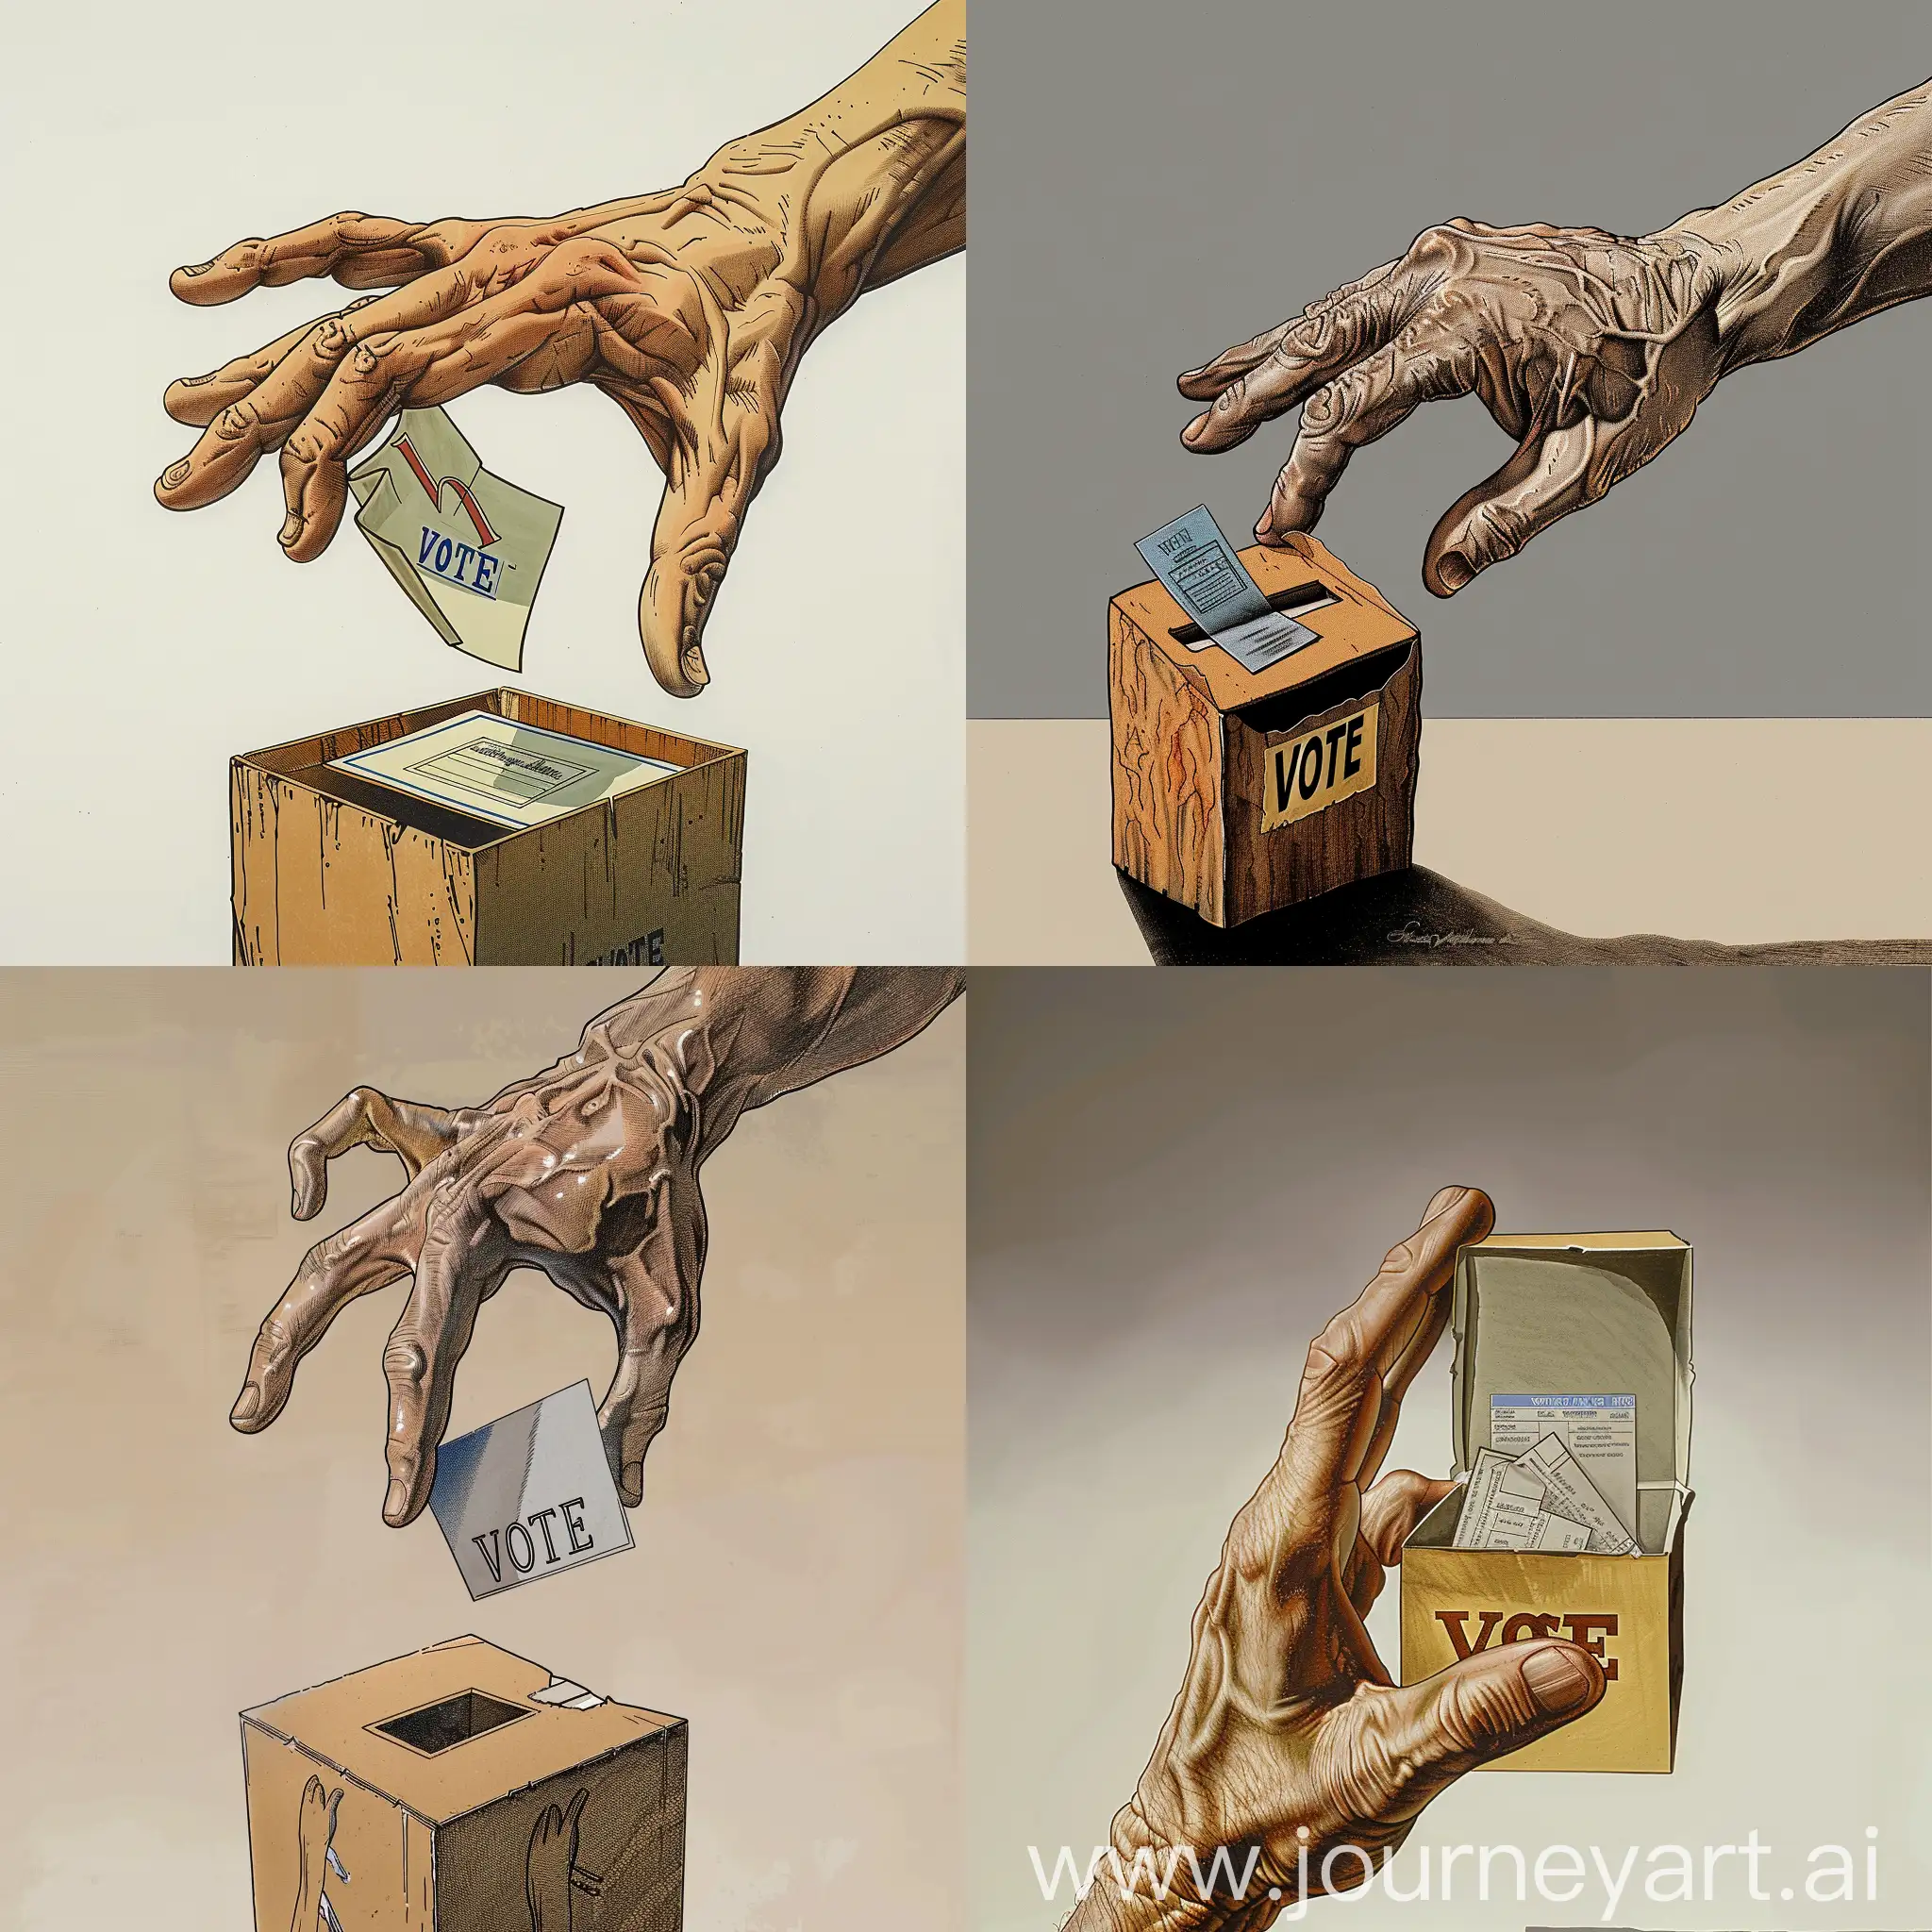 Create a digital artwork depicting a human hand, shown from the right side, reaching out to catch a ballot or a voting box. The voting box should be positioned in such a way that the hand appears to be holding it securely. Inside the voting box, prominently display the word "VOTE" to make it easily recognizable. The hand should be depicted with realistic details, such as fingers, knuckles, and nails, to enhance its clarity and make it easily identifiable as a human hand.